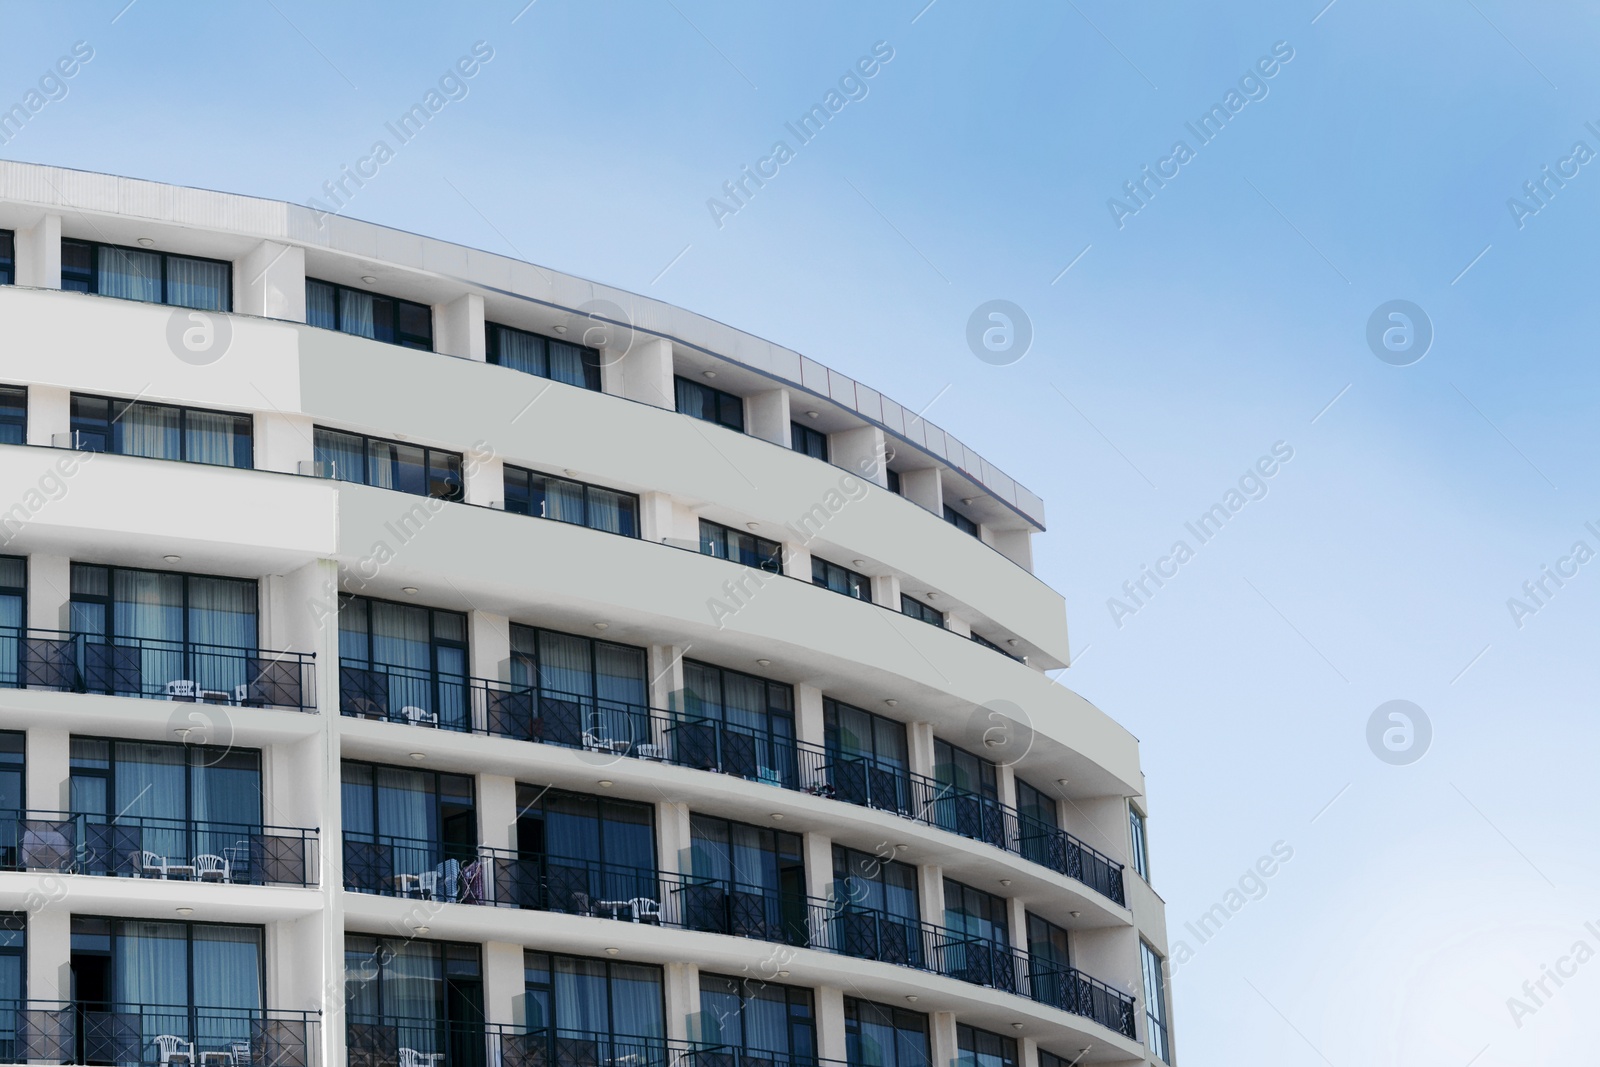 Photo of Exterior of beautiful residential building against blue sky